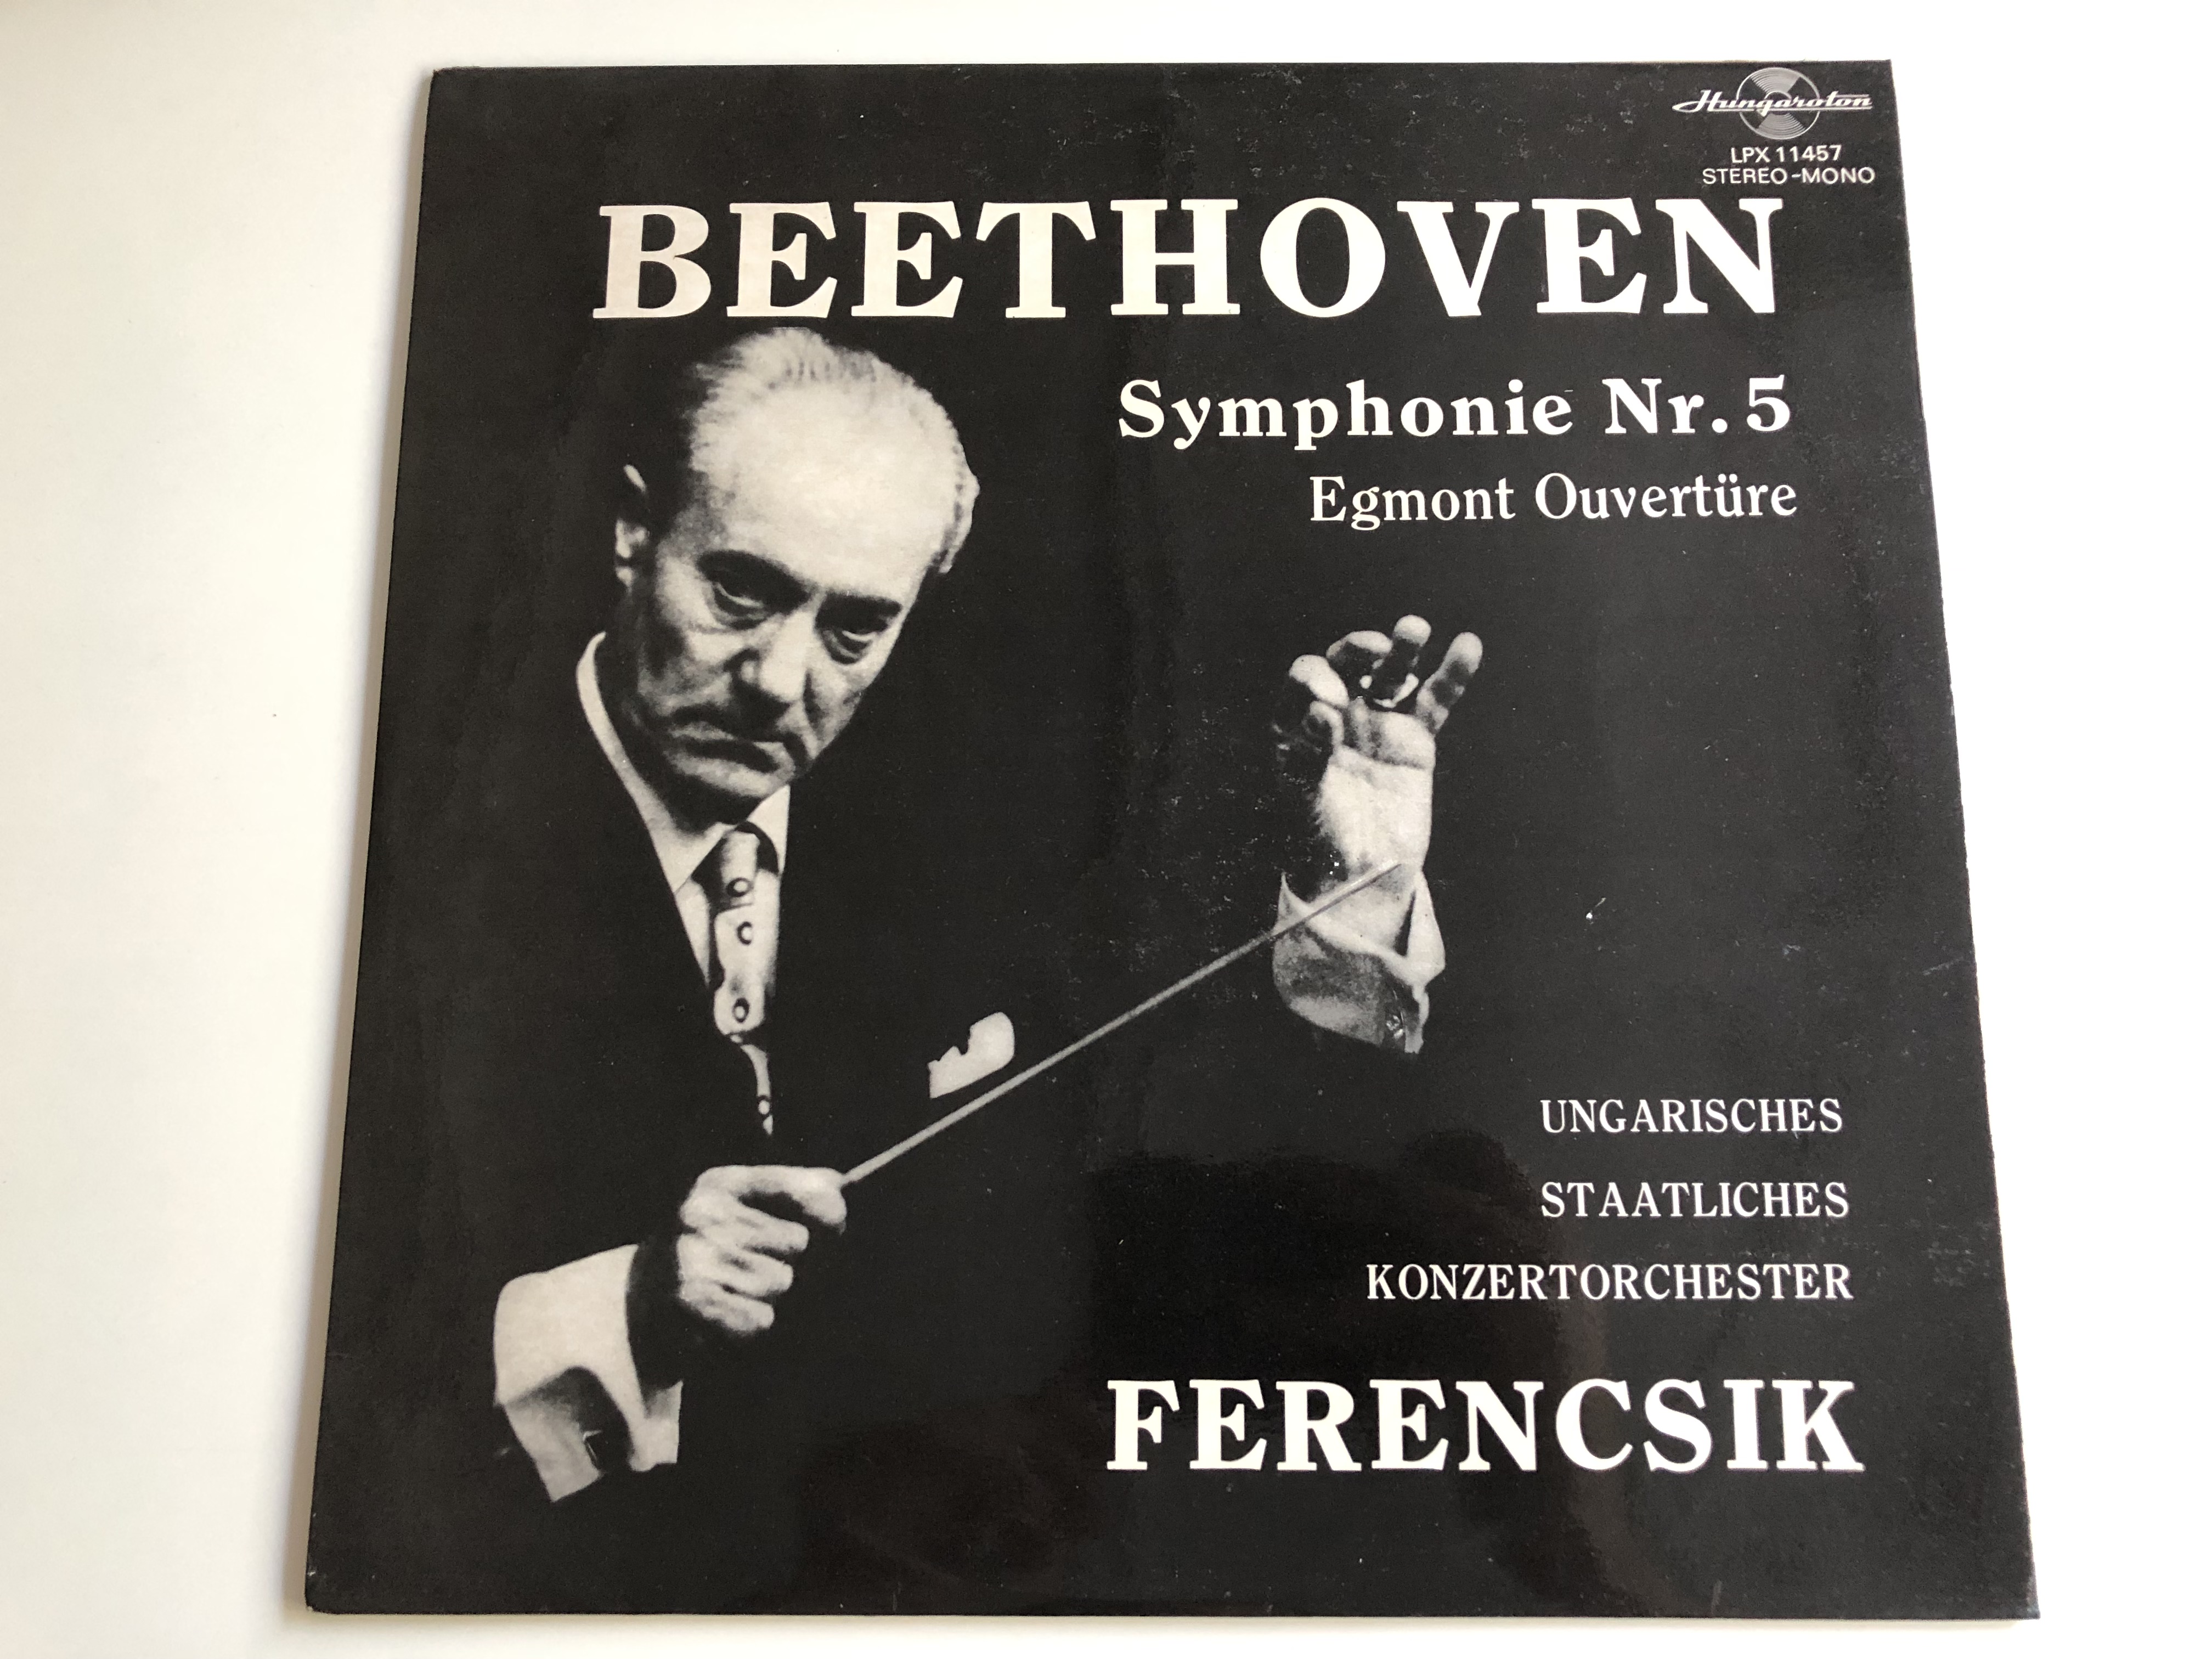 beethoven-symphonie-nr.-5-egmont-overture-ungarisches-staatliches-konzertorchester-conducted-j-nos-ferencsik-hungaroton-lp-stereo-mono-lpx-11457-1-.jpg